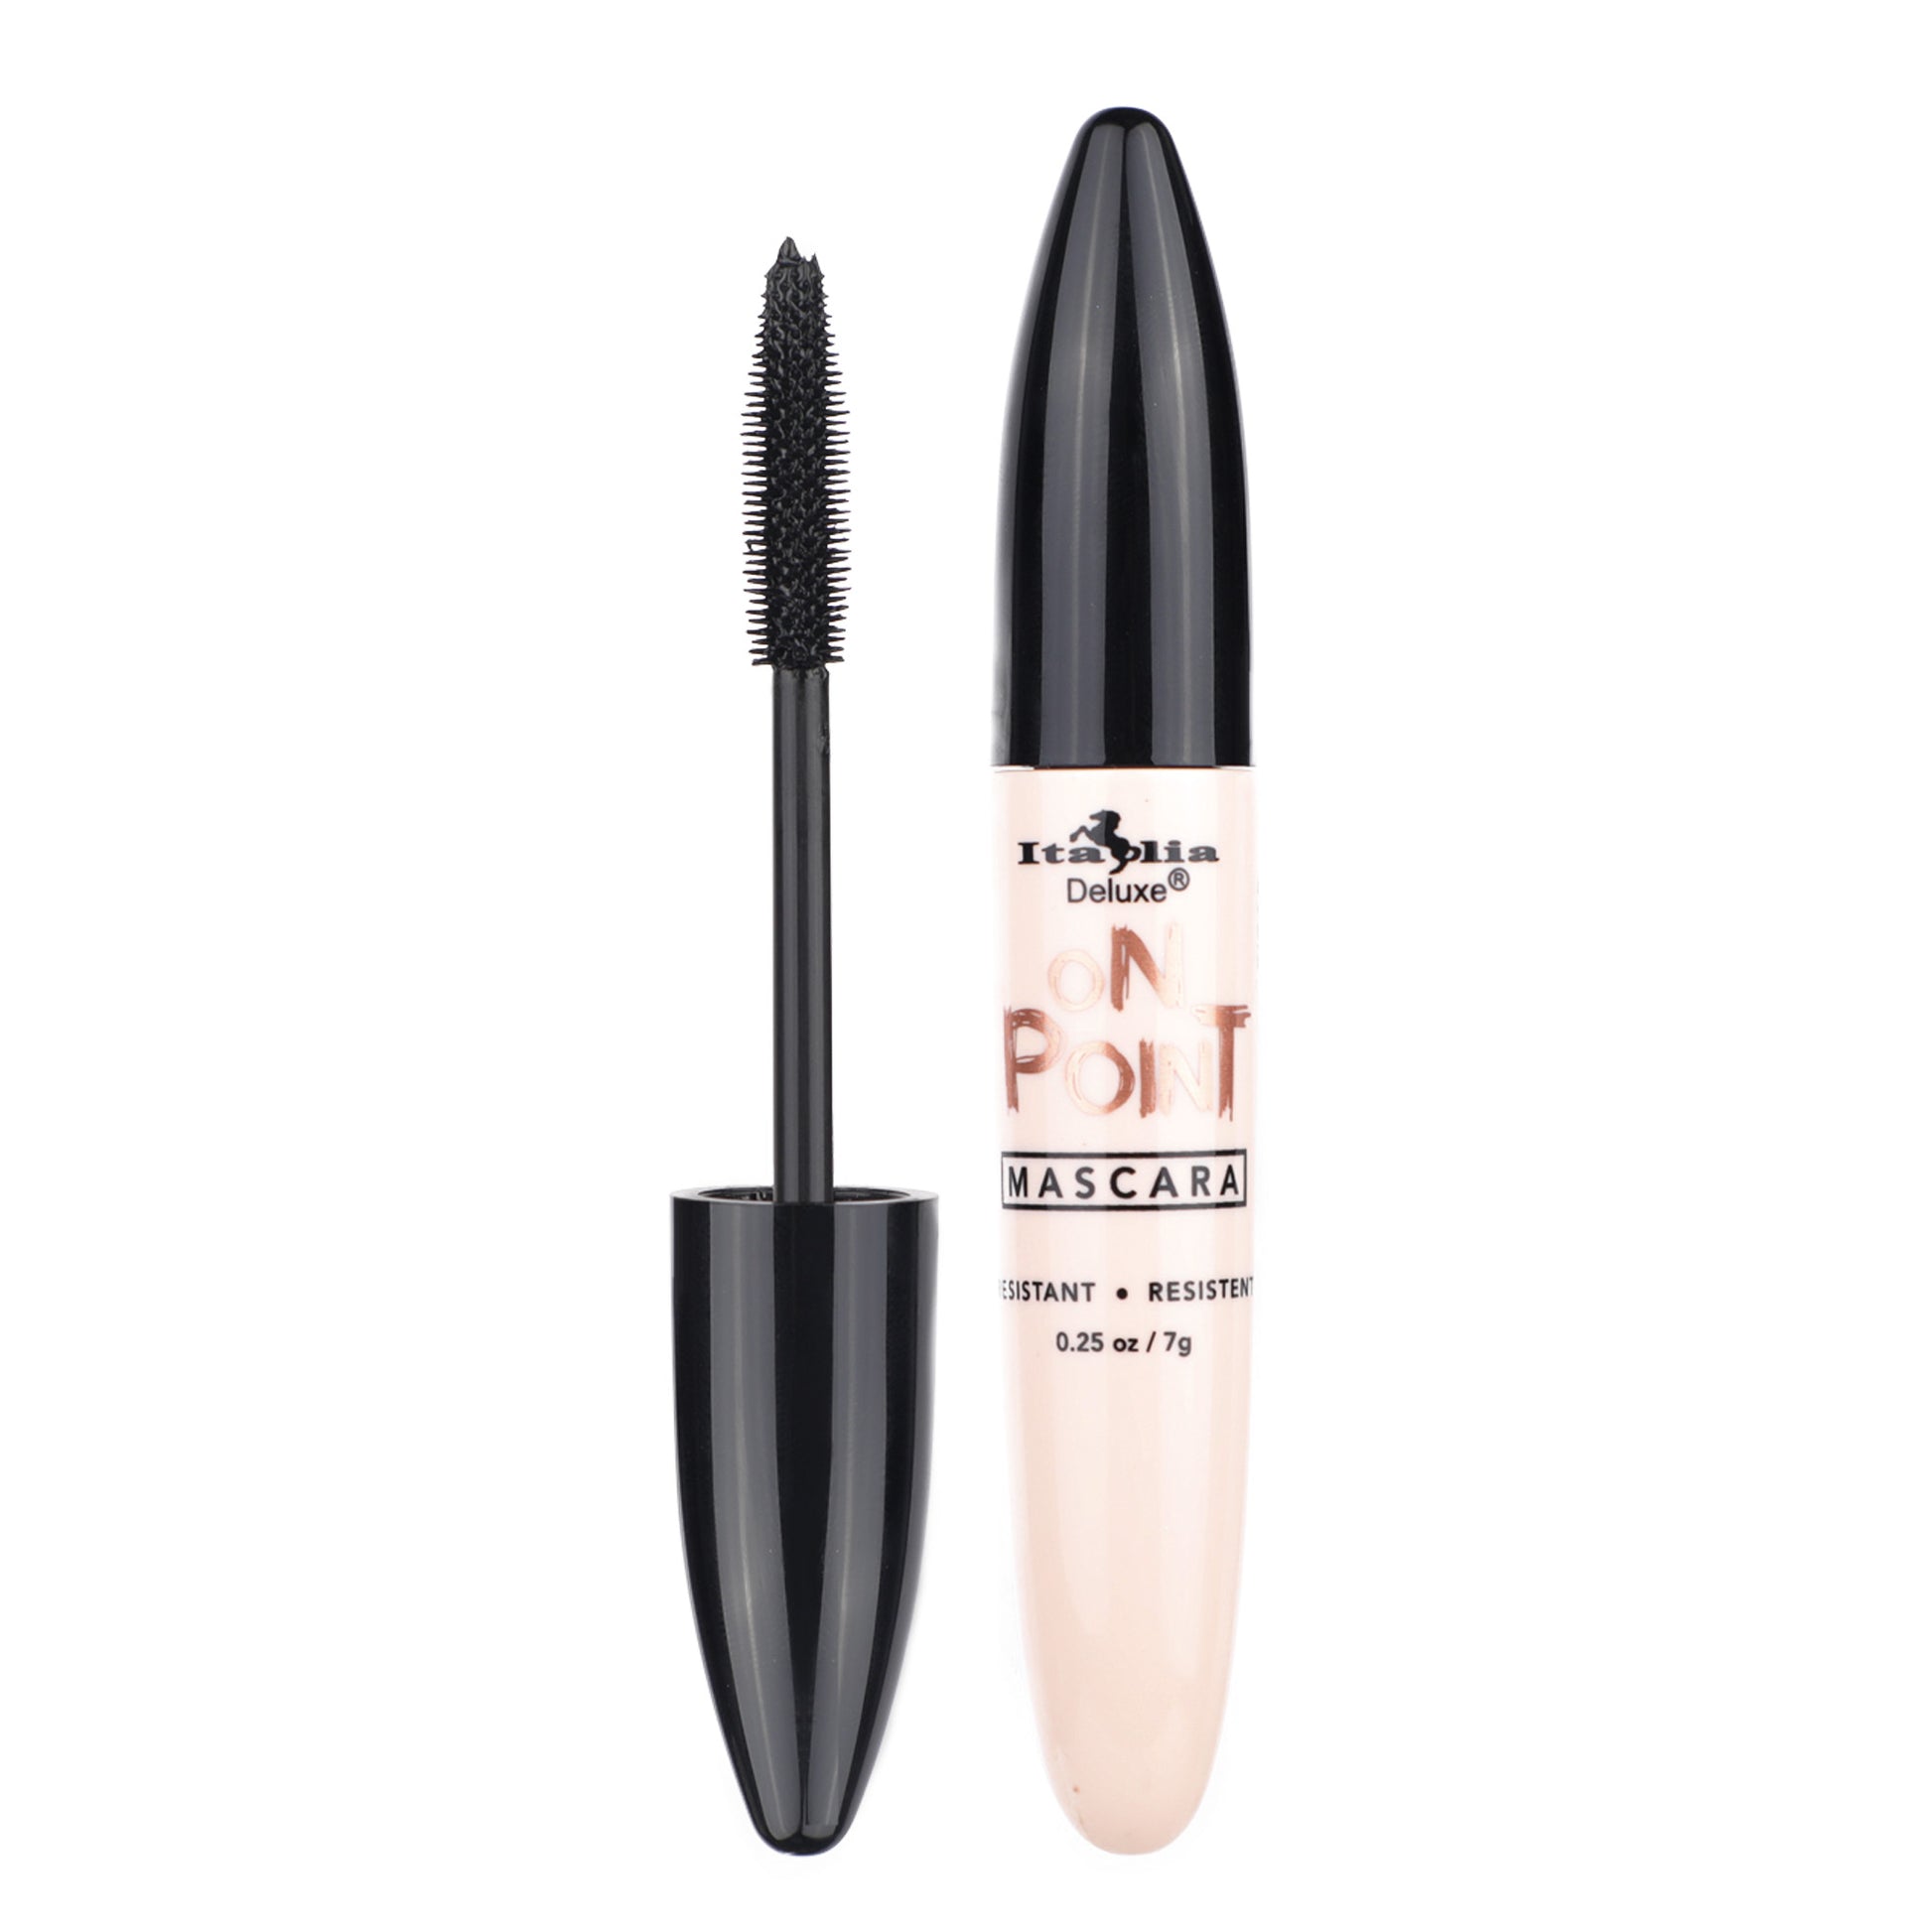 Close-up image of On Point Mascara tube alongside a silicone wand applicator, showcasing its sleek design and innovative brush for lifting, curling, and defining lashes in rich, intense black.